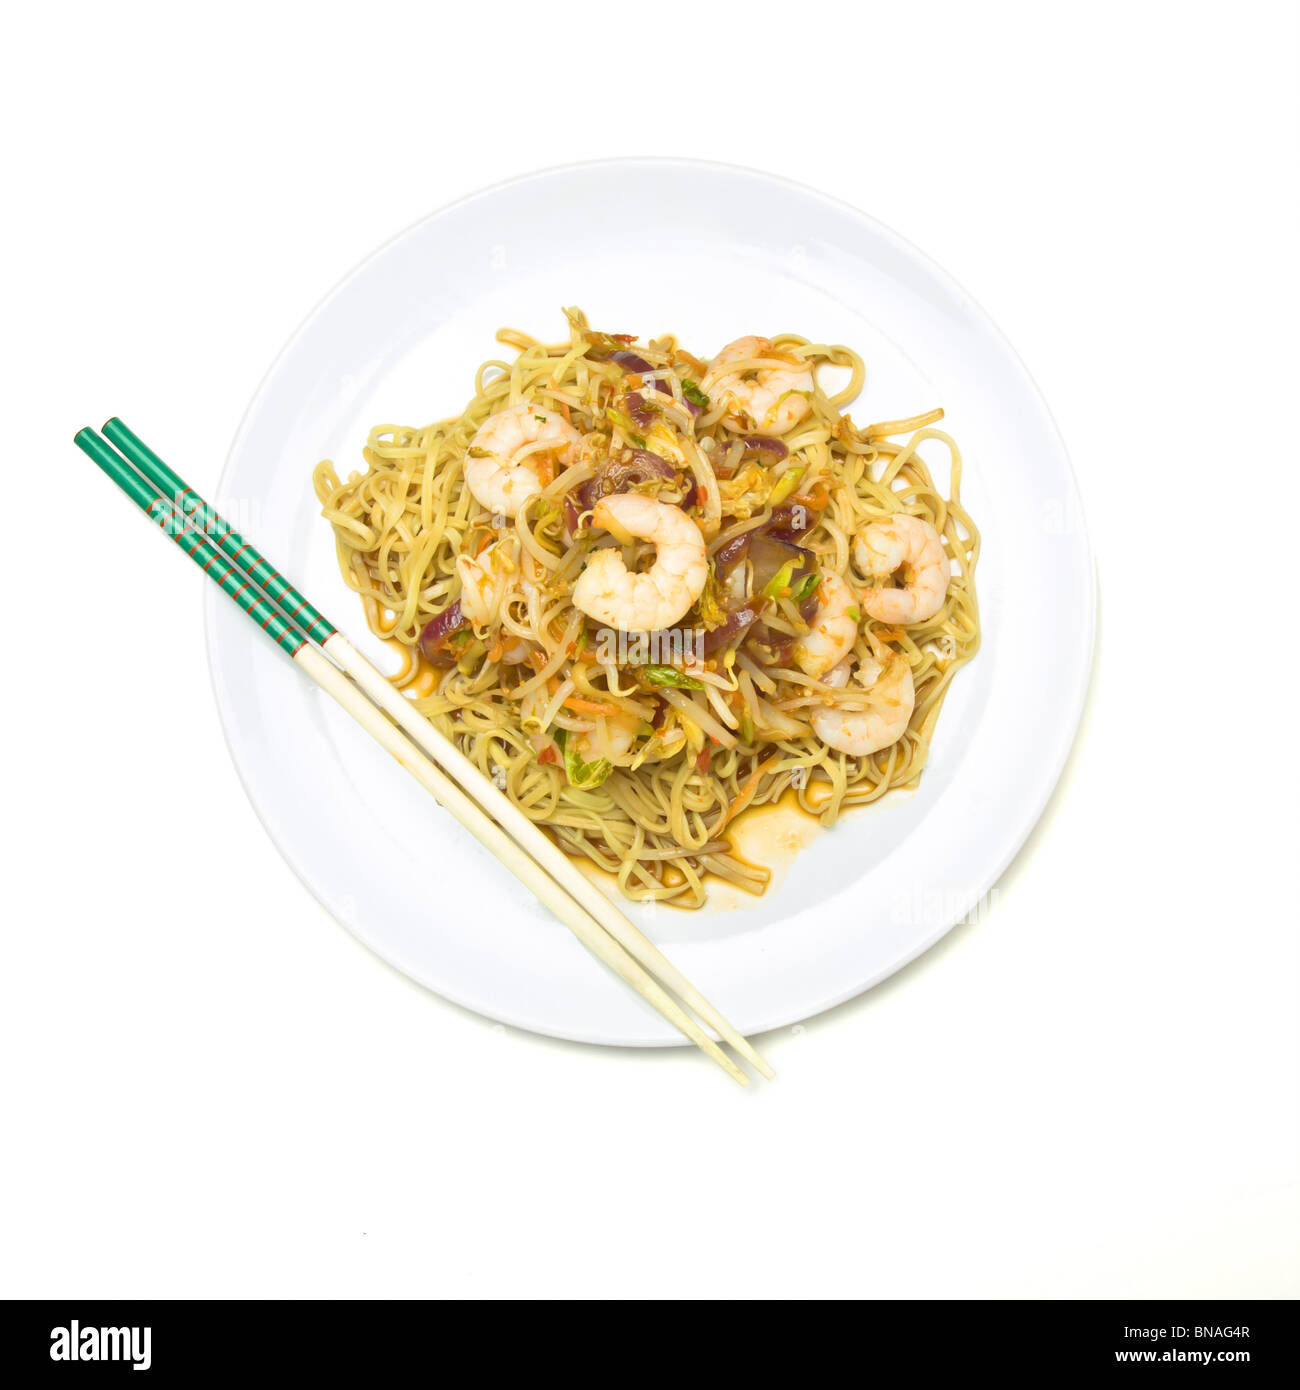 Prawn Stir fry on white plate isolated against white background. Stock Photo